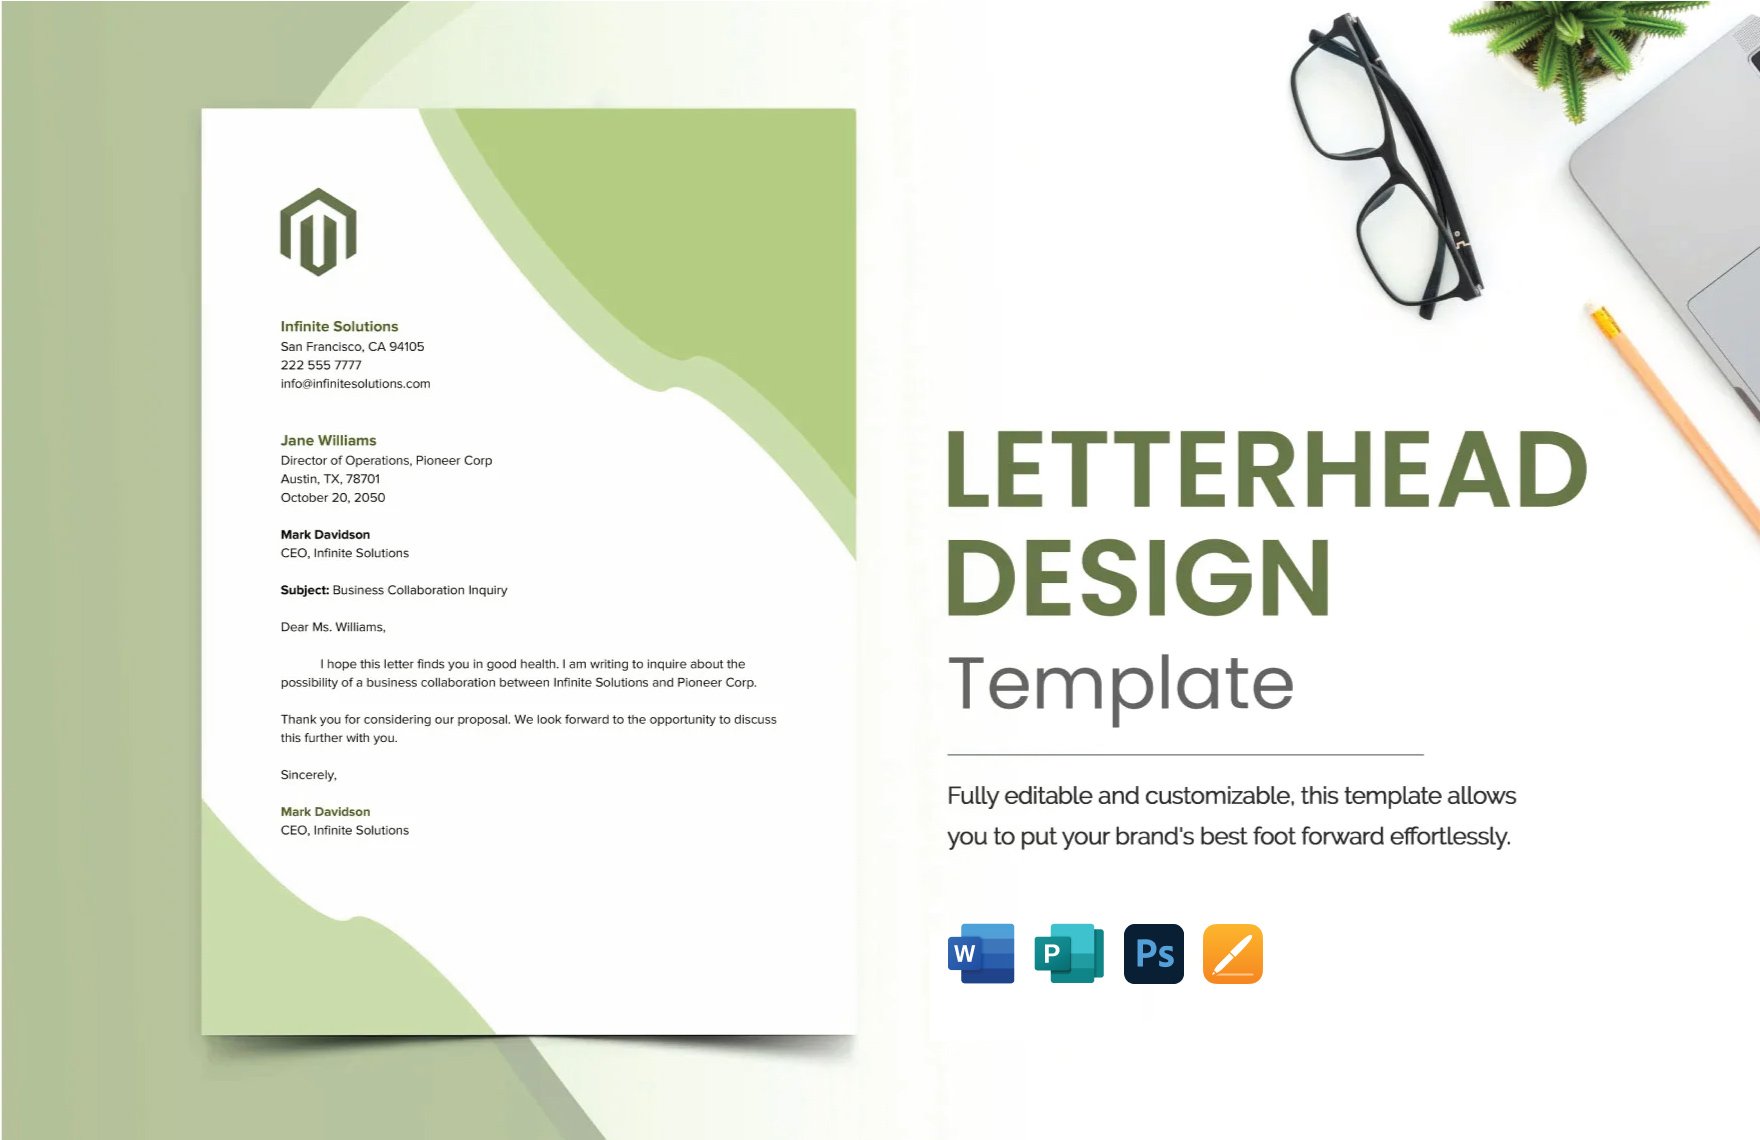 Letterhead Design Template in Word, PSD, Apple Pages, Publisher